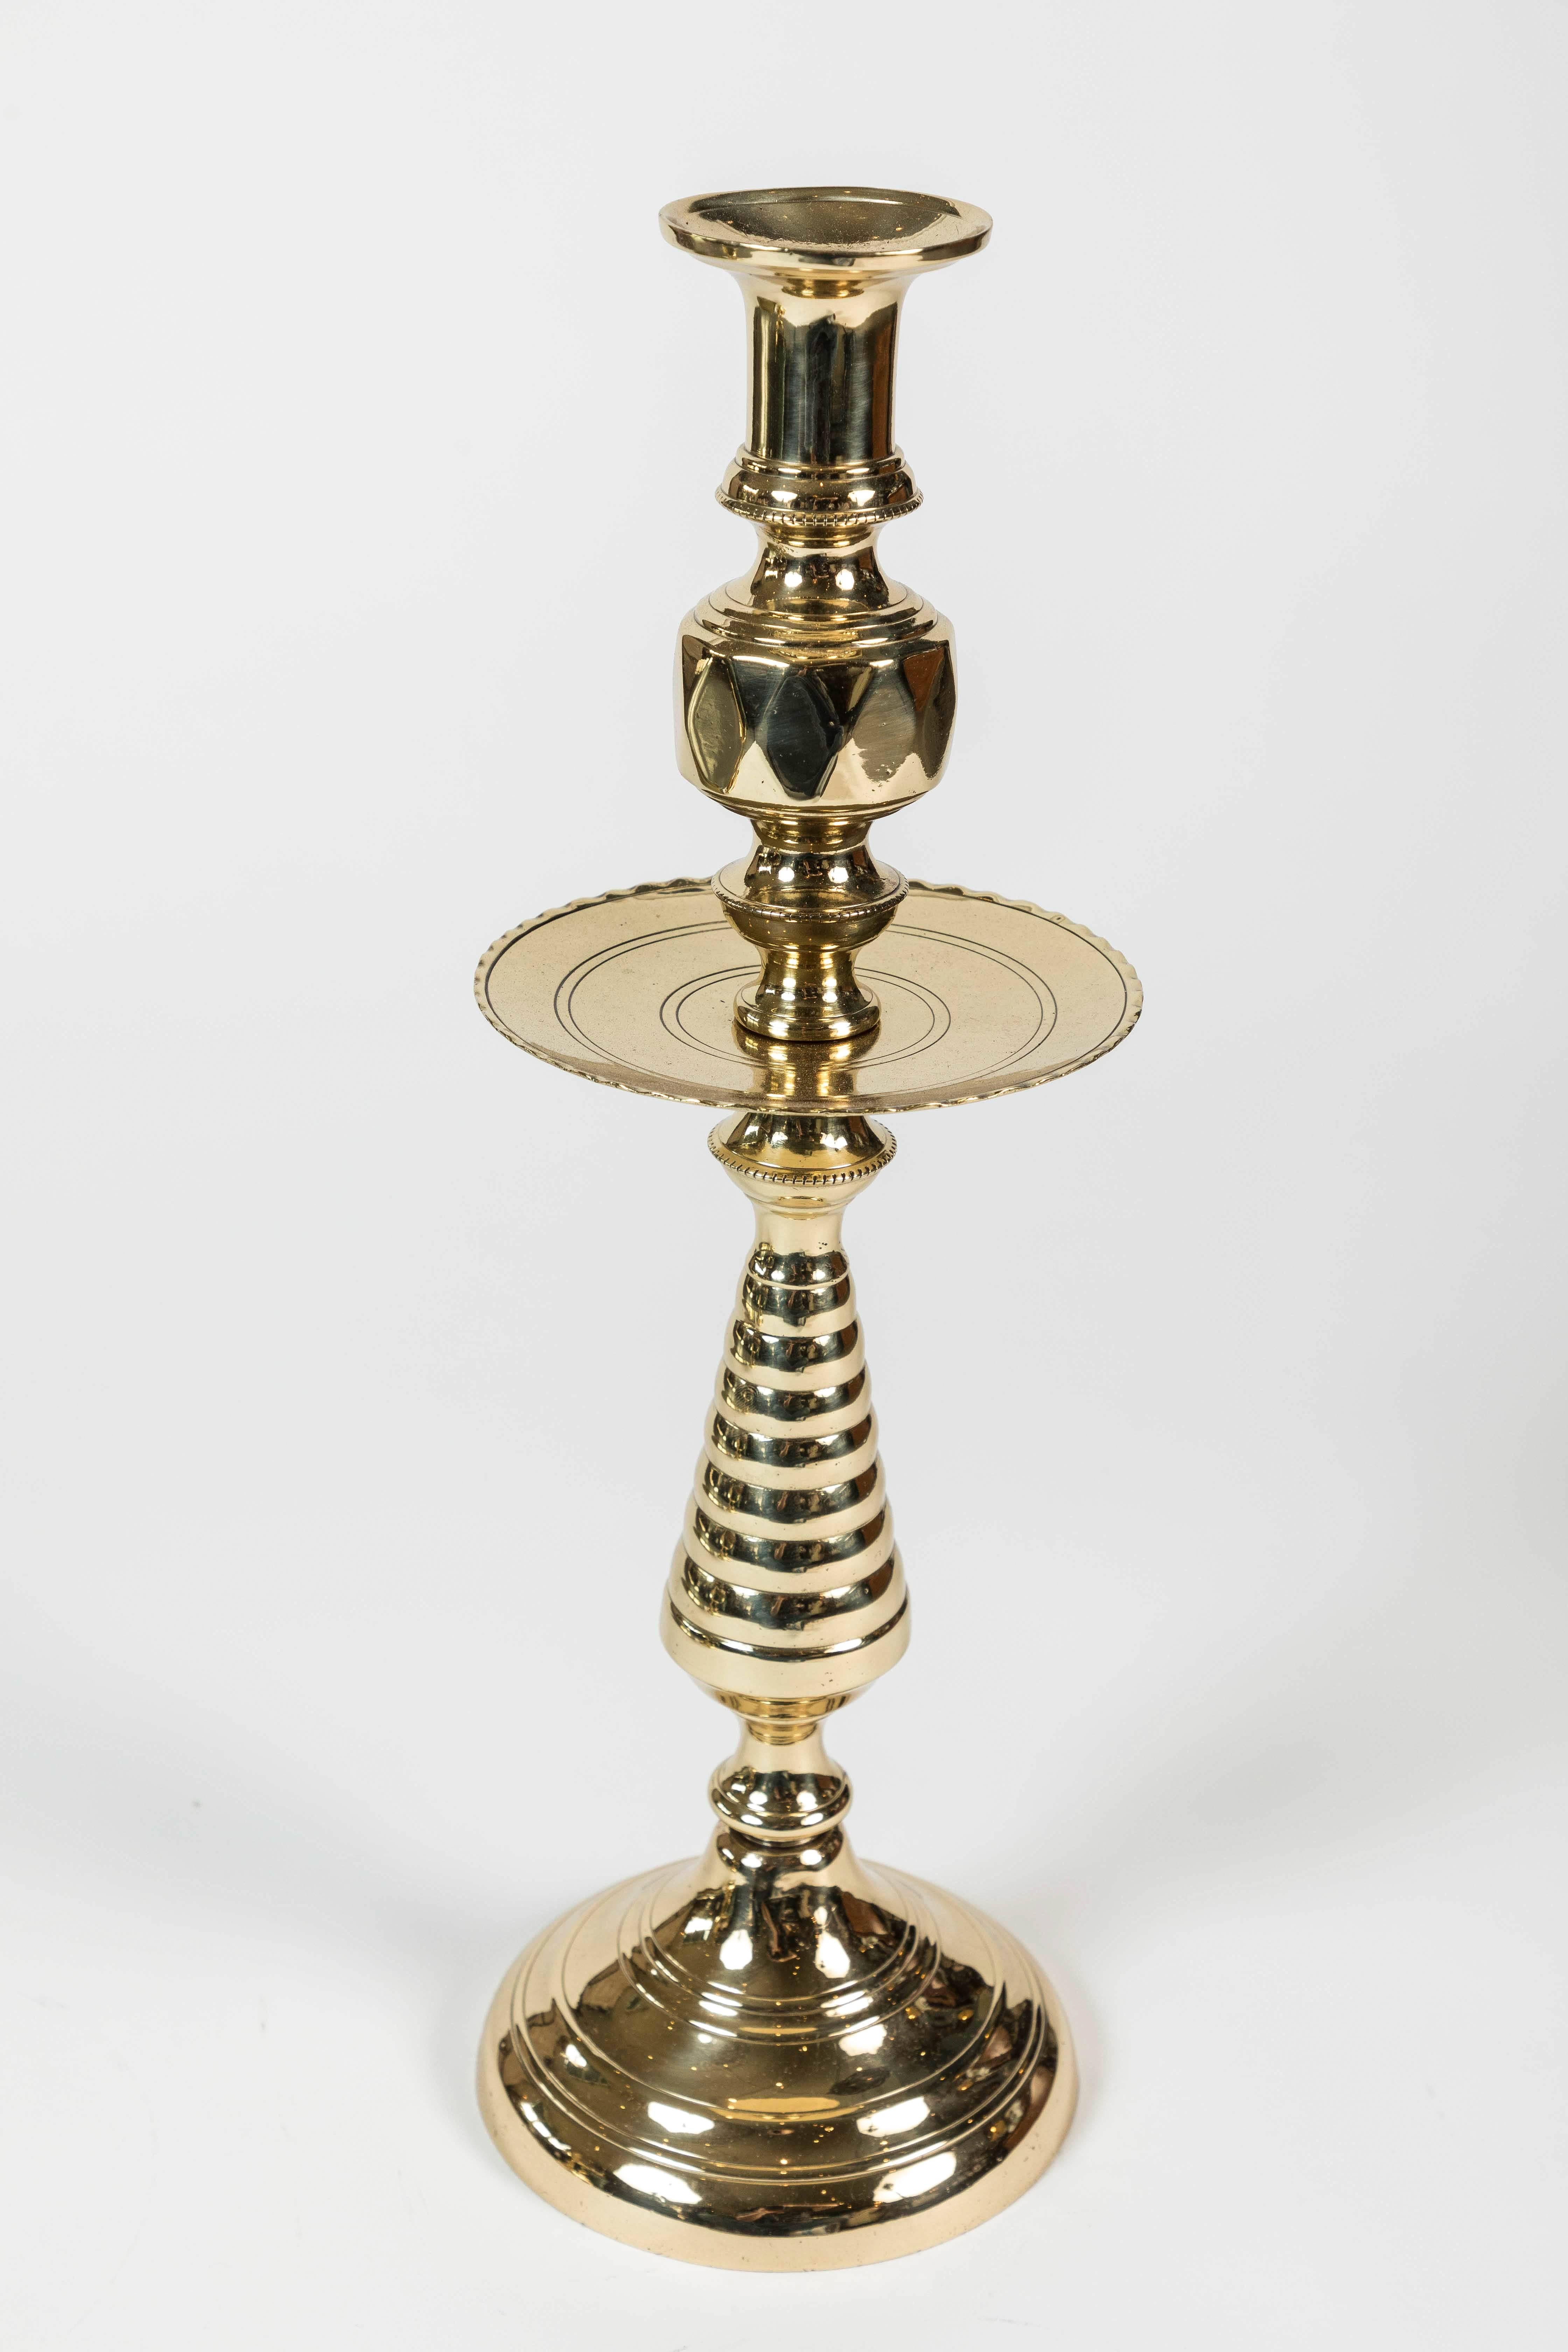 Newly polished brass candleholder with beehive pattern stems and wide wax catcher with crimped edge detail, circa 1850-1900. 17